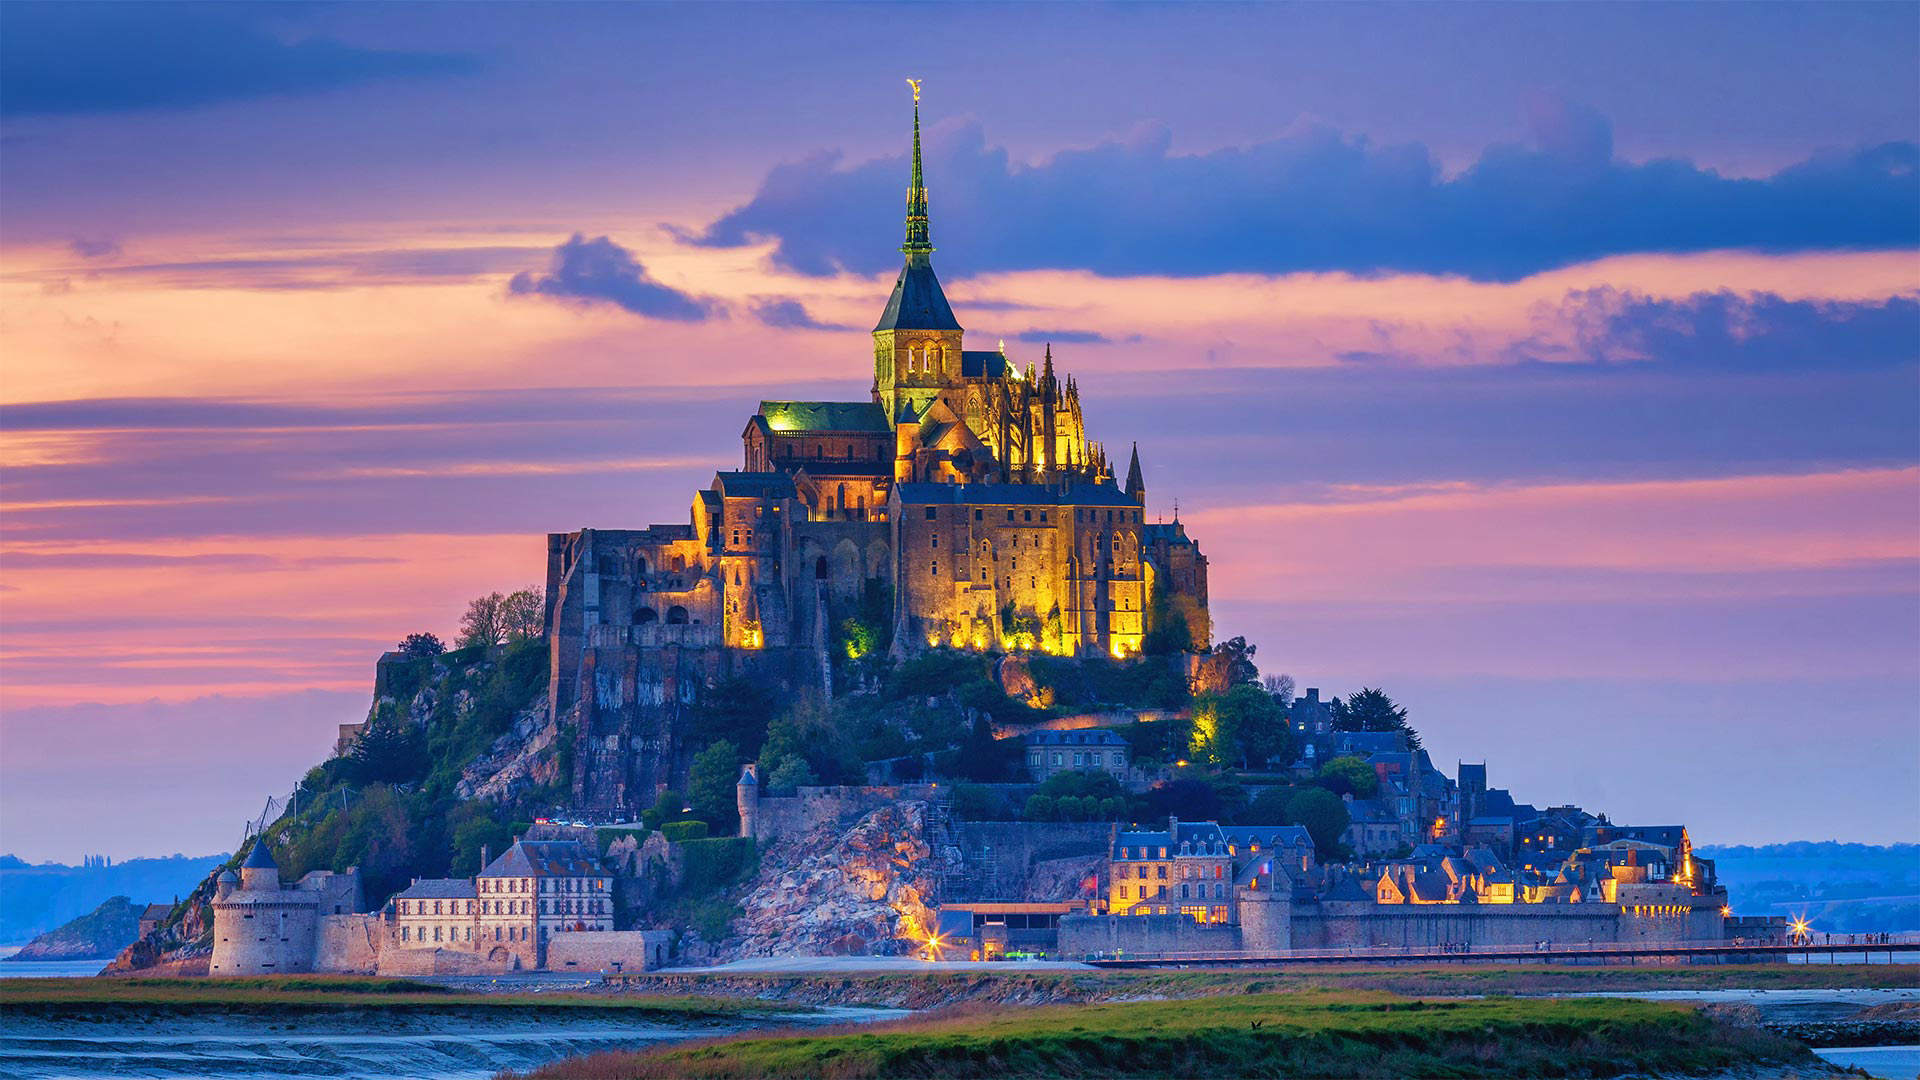 The island of Mont-Saint-Michel in Normandy, France - DaLiu/Getty Images)